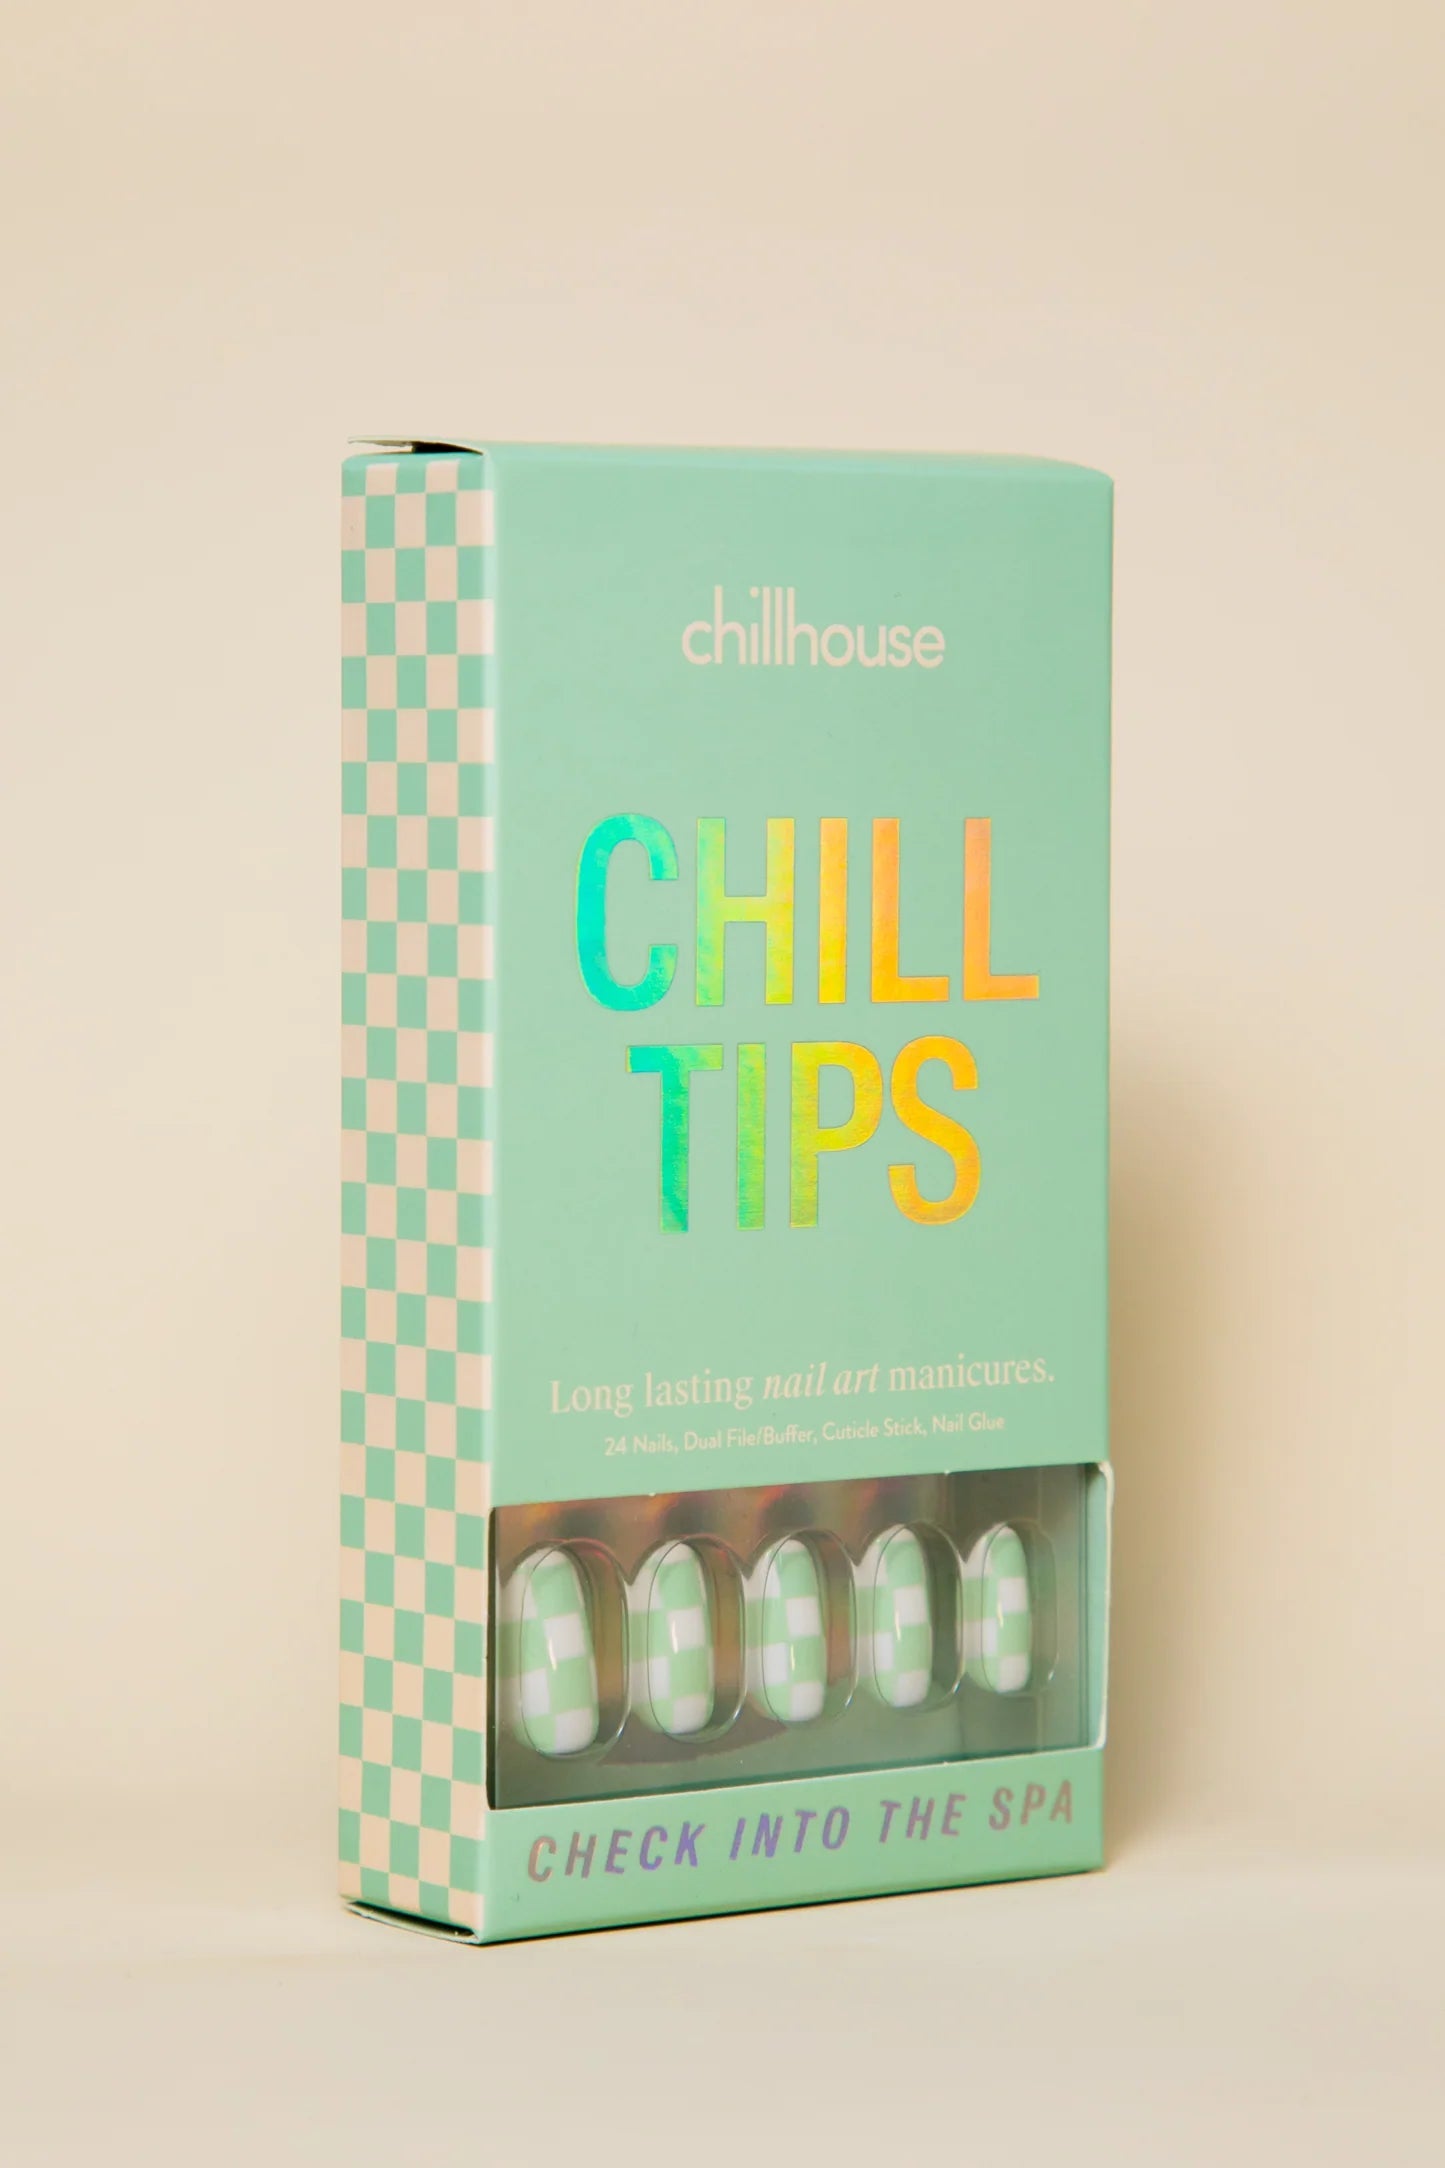 Chill Tips in Check into the Spa Chillhouse 